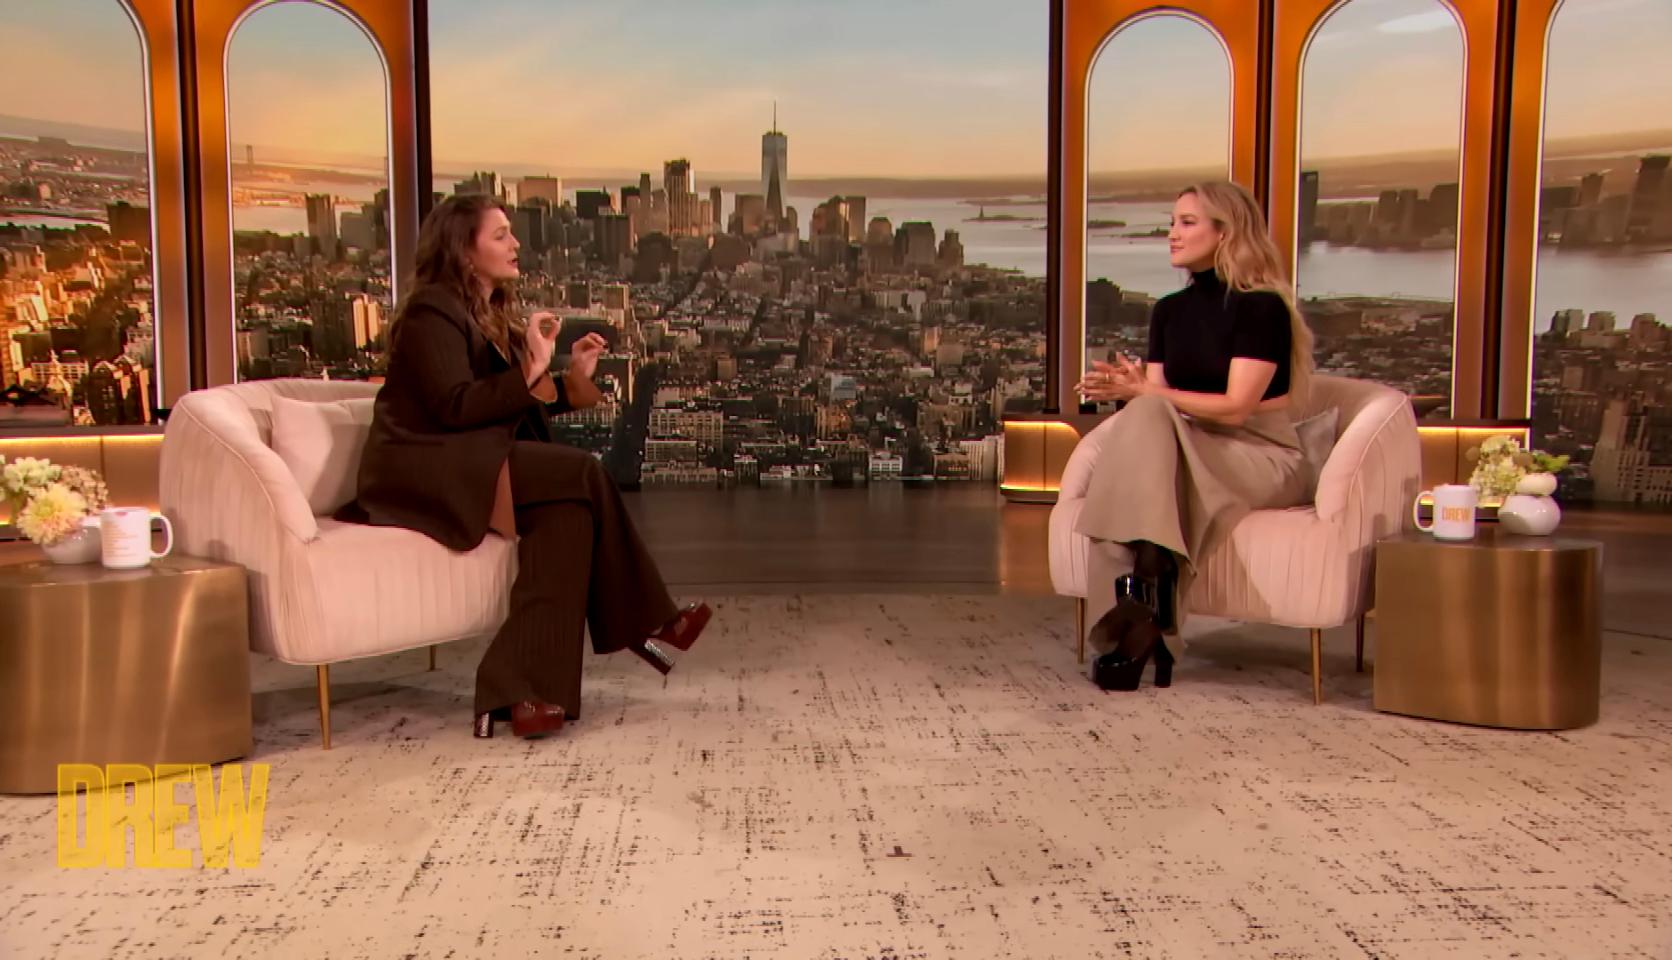 Drew Barrymore and Kate Hudson on "The Drew Barrymore Show"